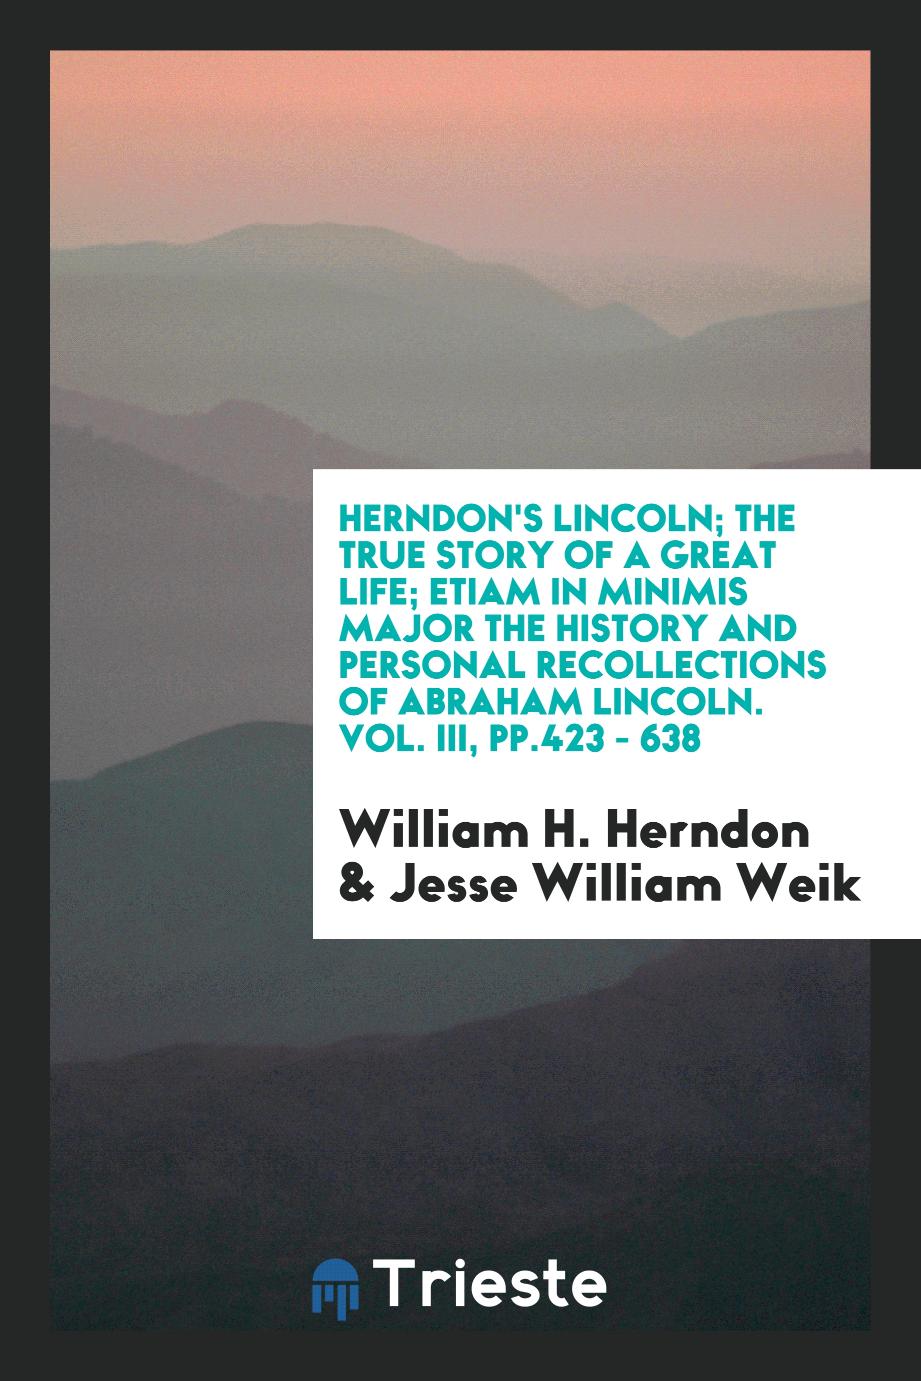 Herndon's Lincoln; the true story of a great life; Etiam in minimis major the history and personal recollections of Abraham Lincoln. Vol. III, pp.423 - 638